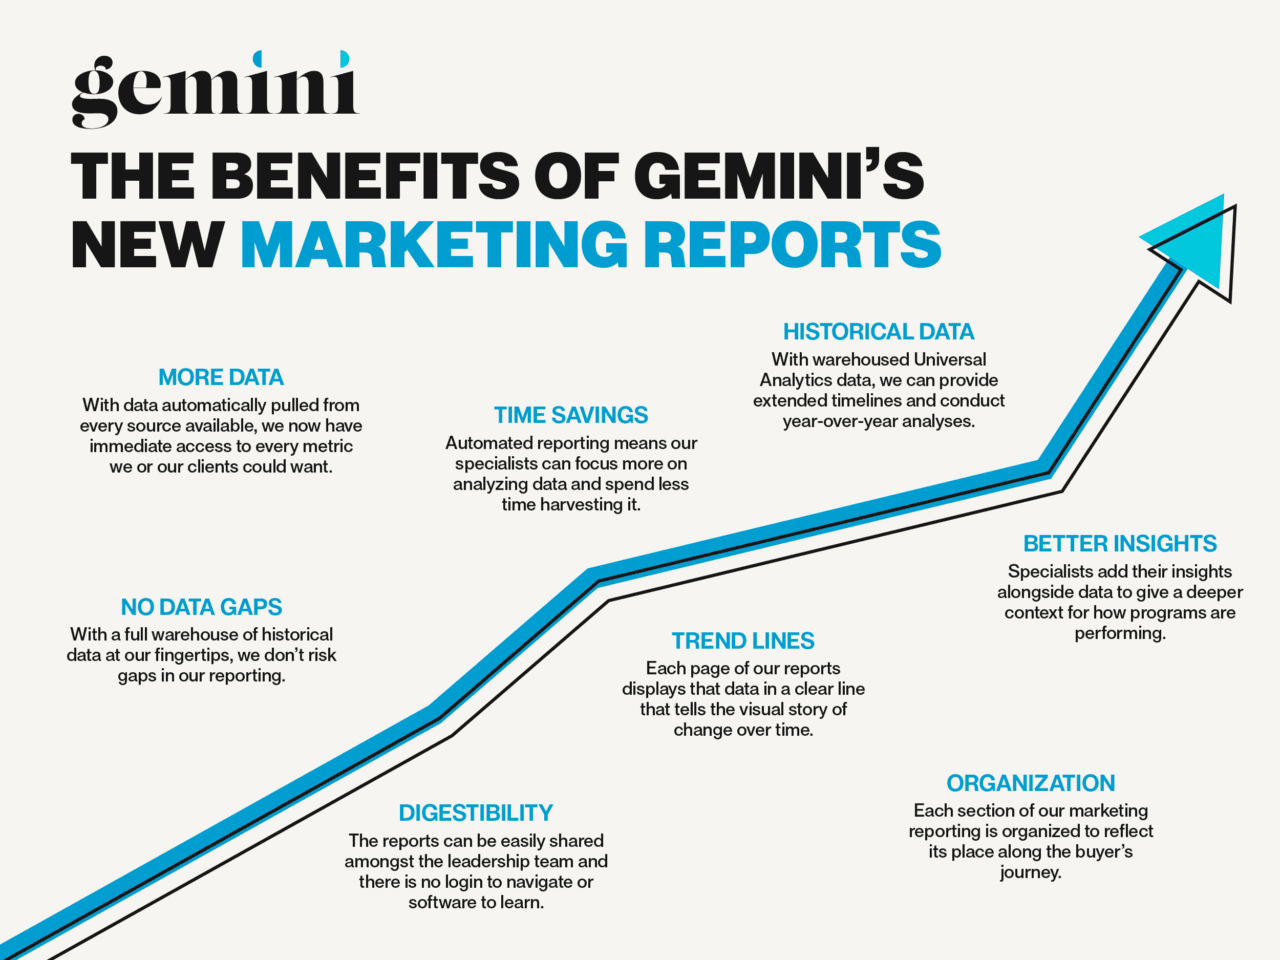 Infographic showing the benefits of Gemini's new marketing reports.